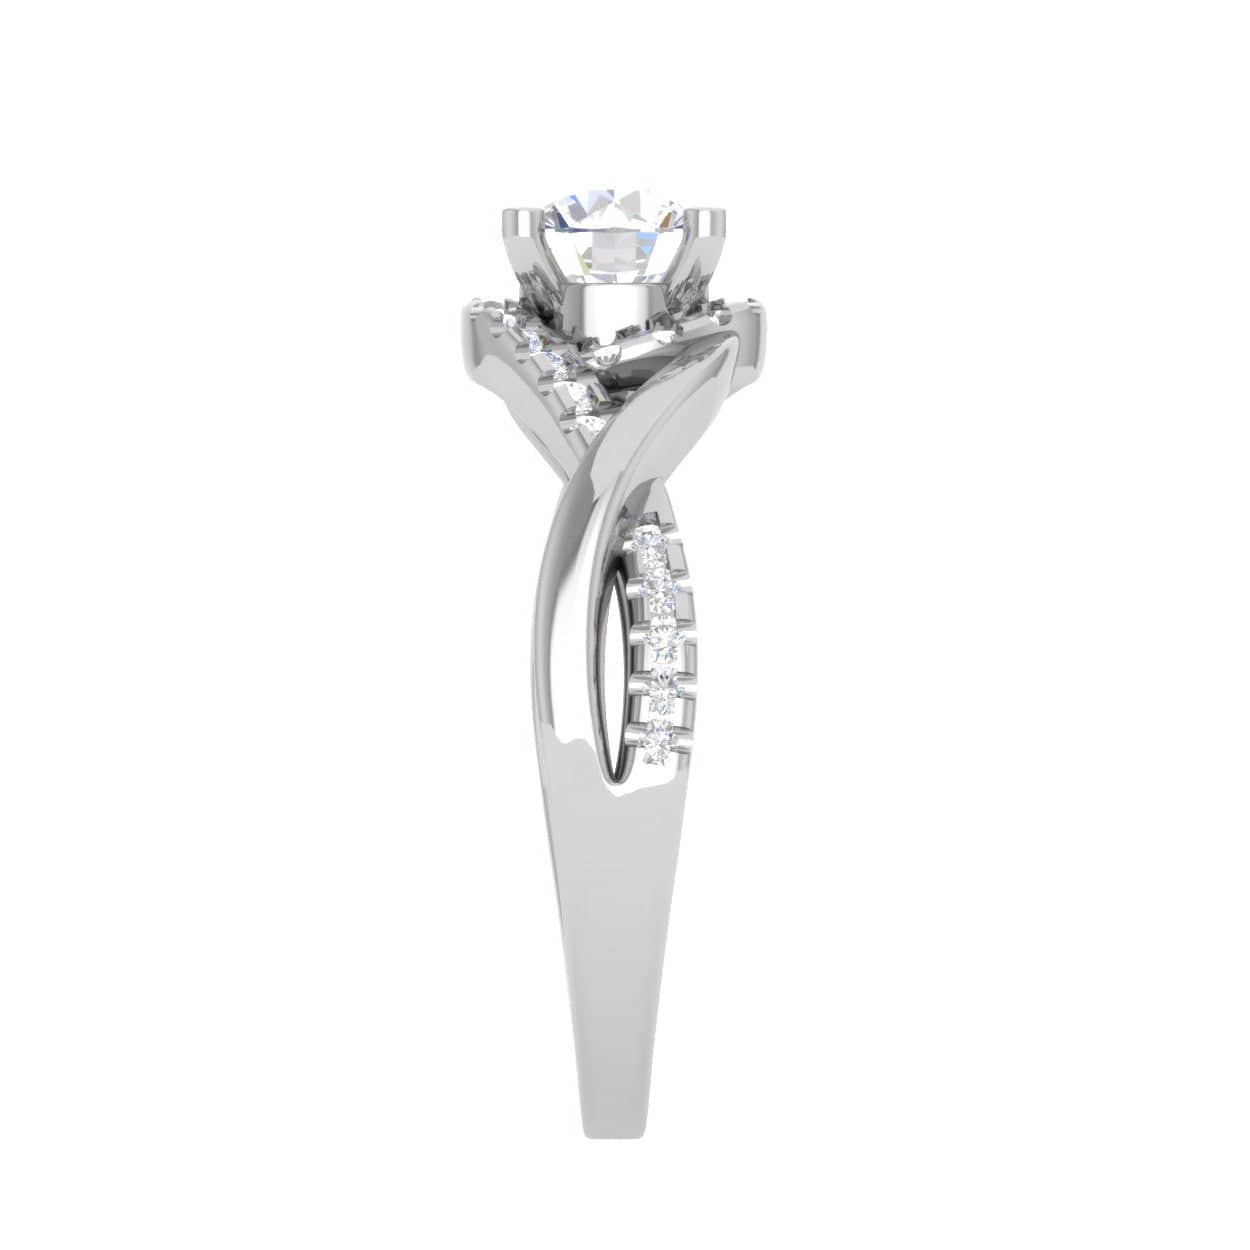 70-Pointer Lab Grown Solitaire Platinum Diamond Single Twisted Shank Engagement Ring JL PT LG G WB6007E-A